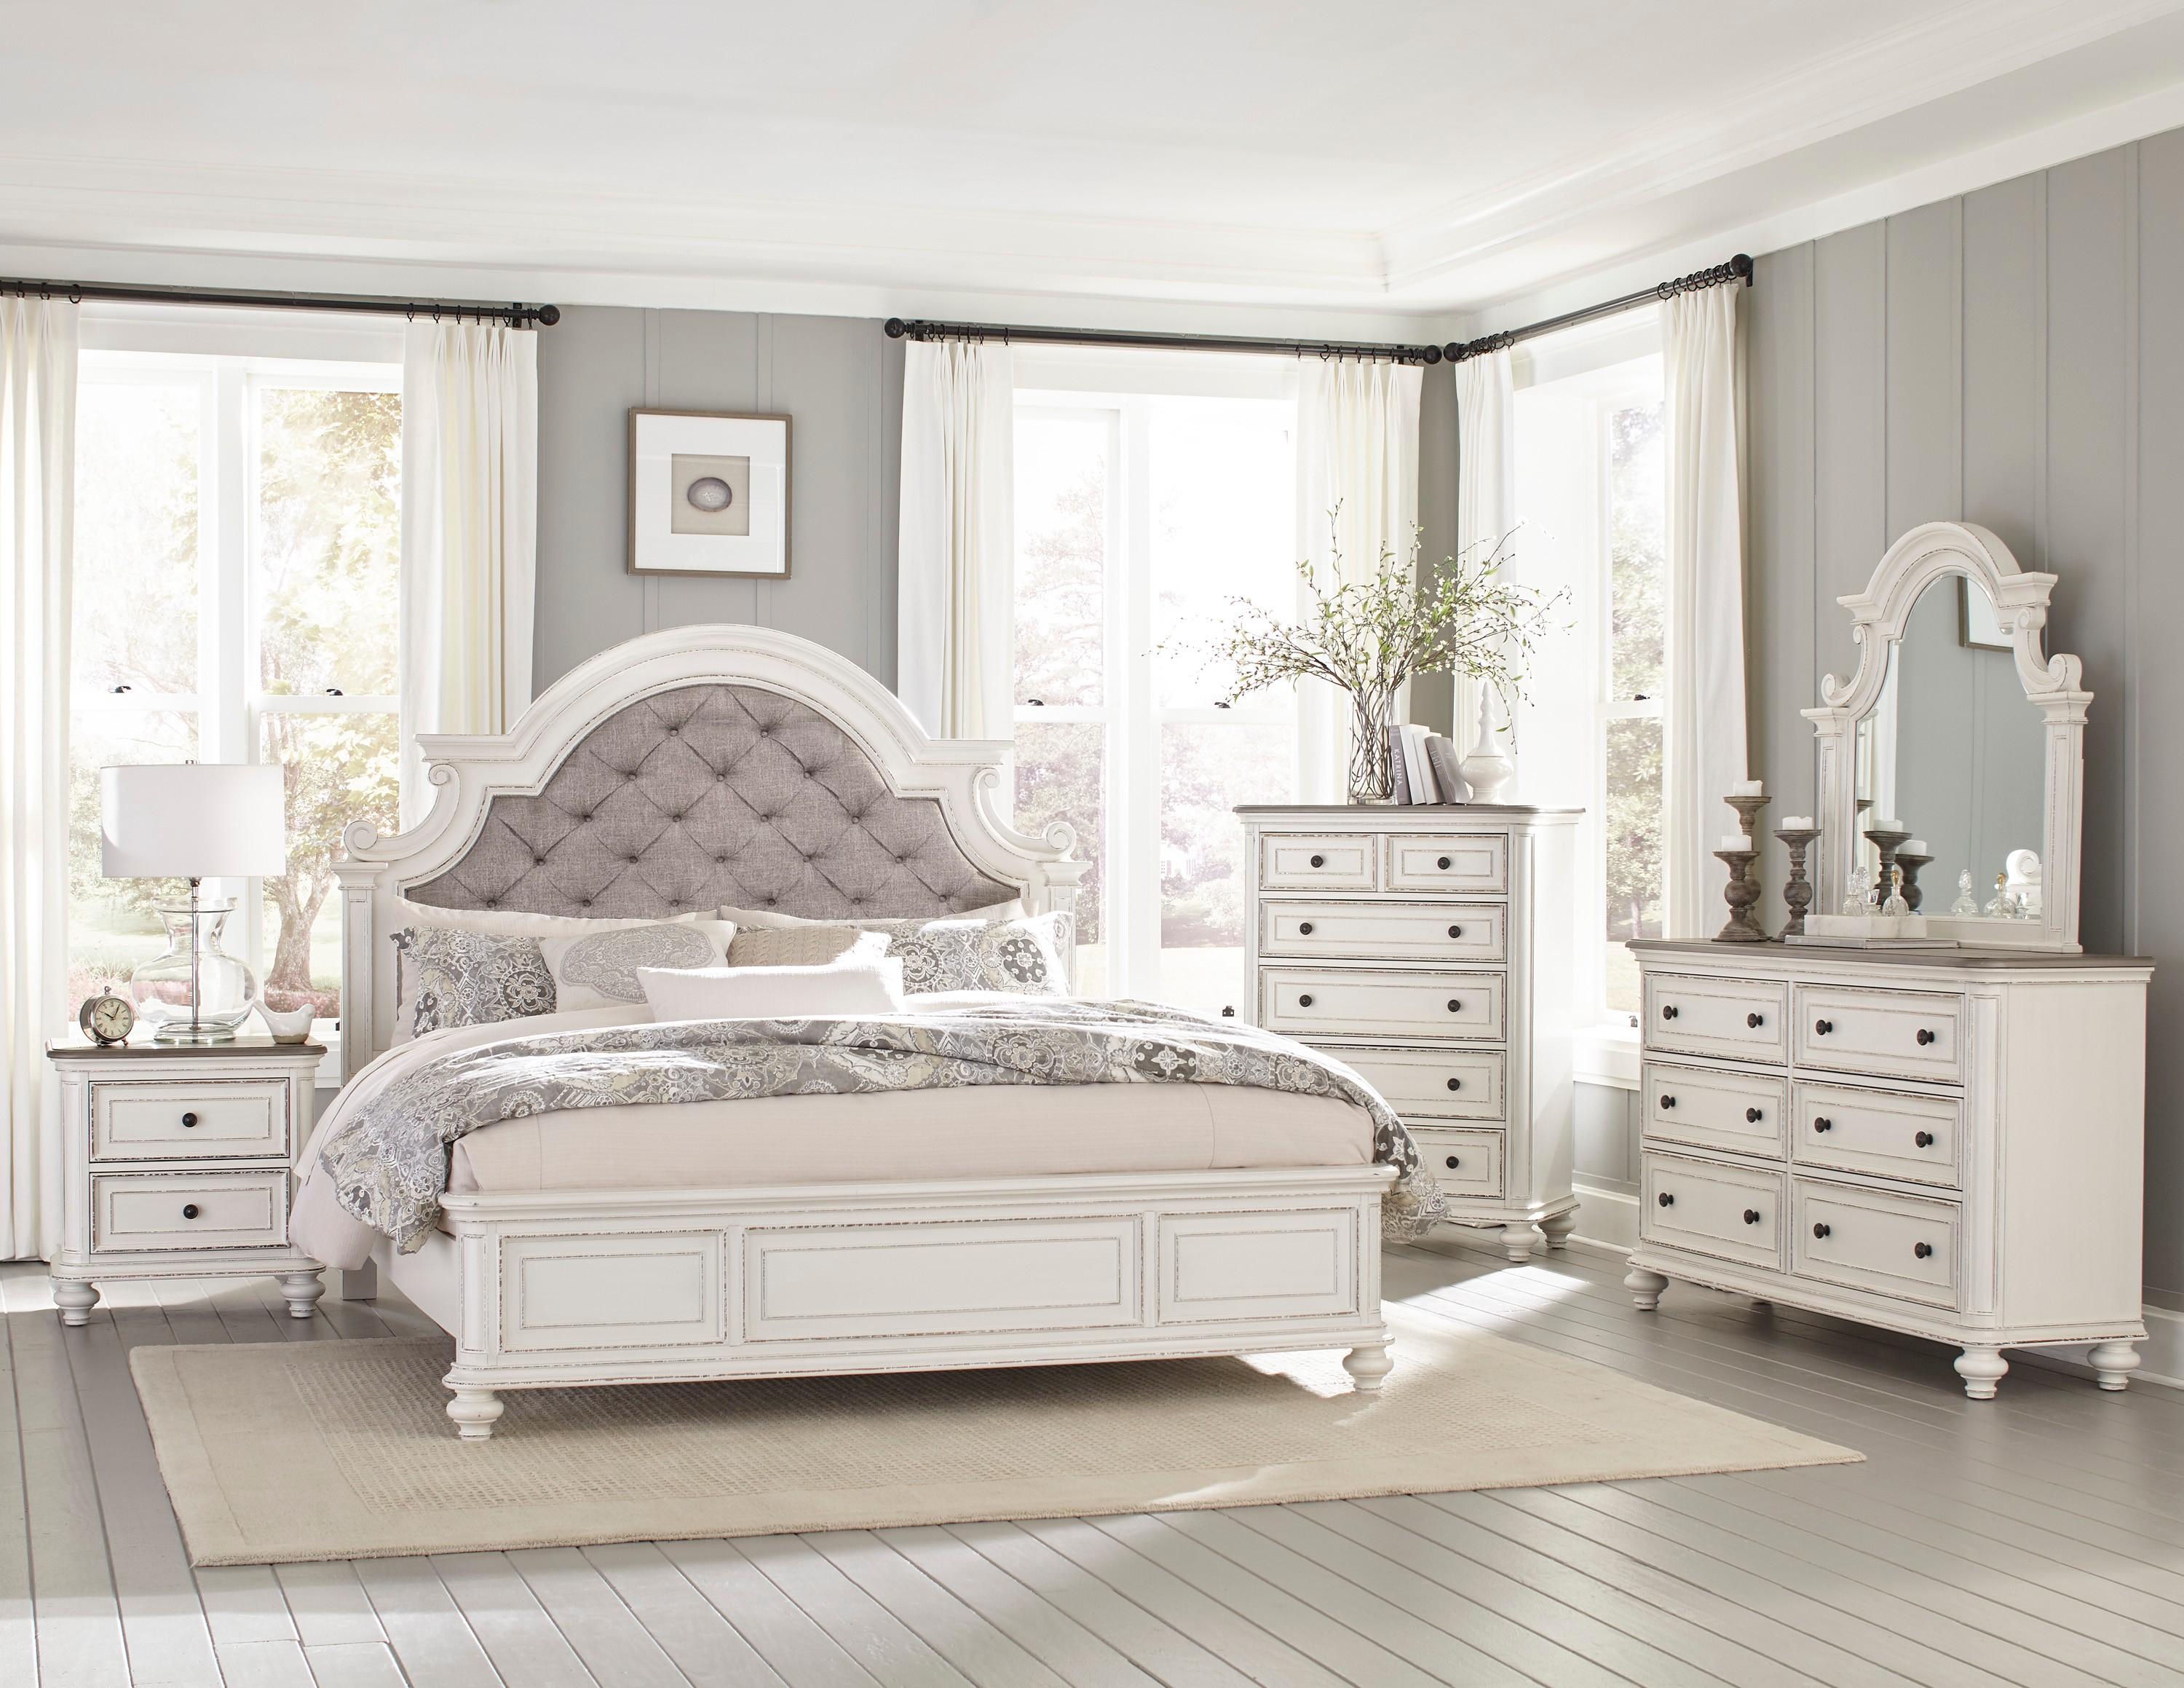 Classic Bedroom Set 1624KW-1CK-5PC Baylesford 1624KW-1CK-5PC in Antique White Polyester